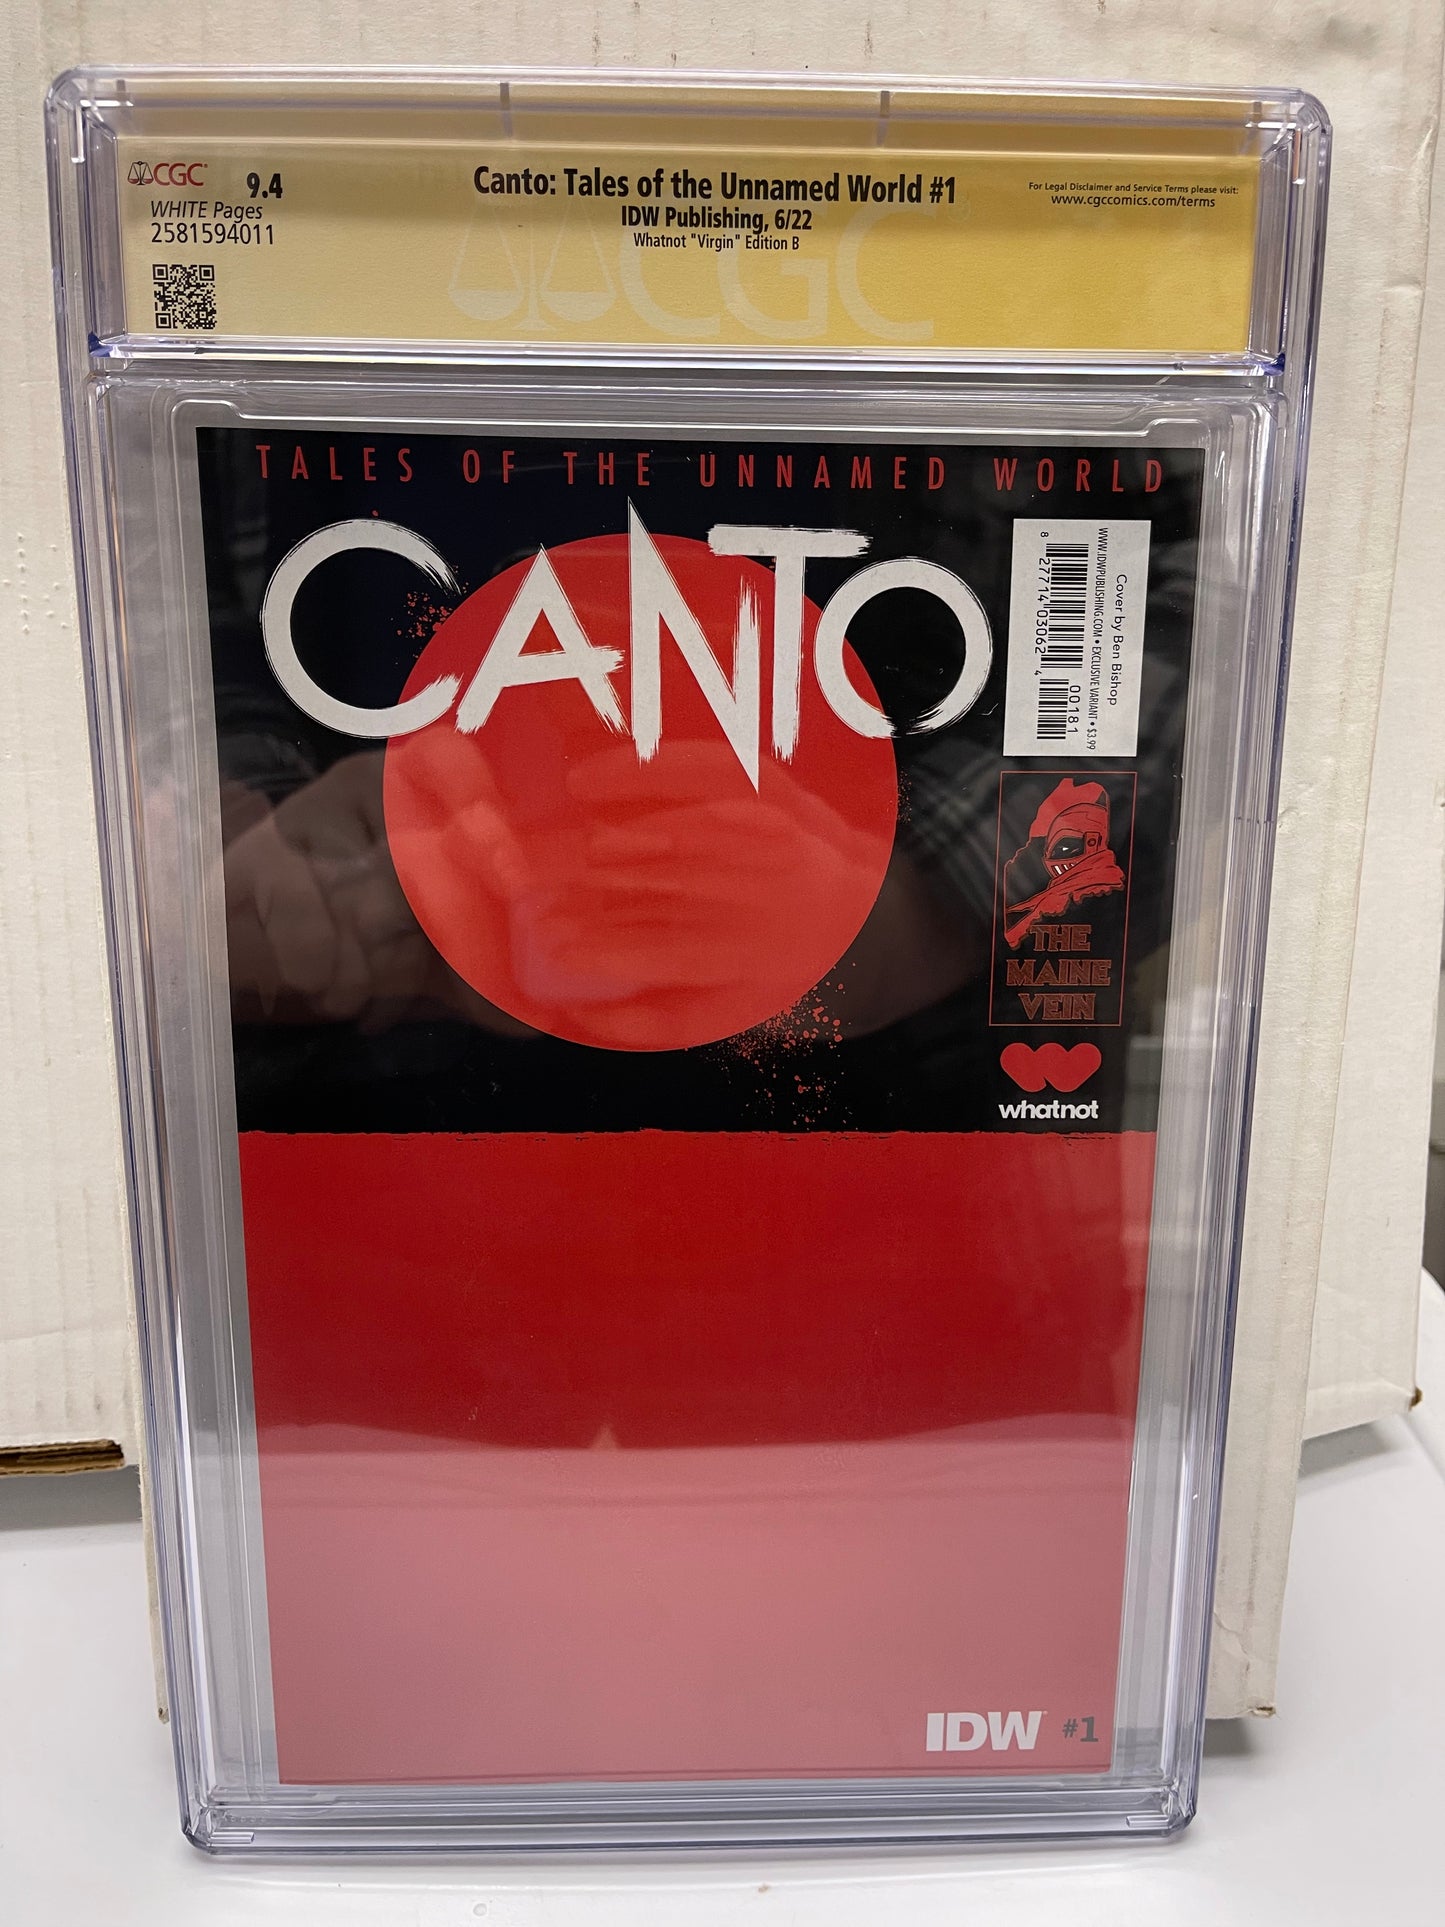 Canto Tales Of The Unnamed World #1 Ben Bishop WhatNot Last Ronin Virgin Homage CGC Signature Series - 9.4 (Signed by Ben Bishop